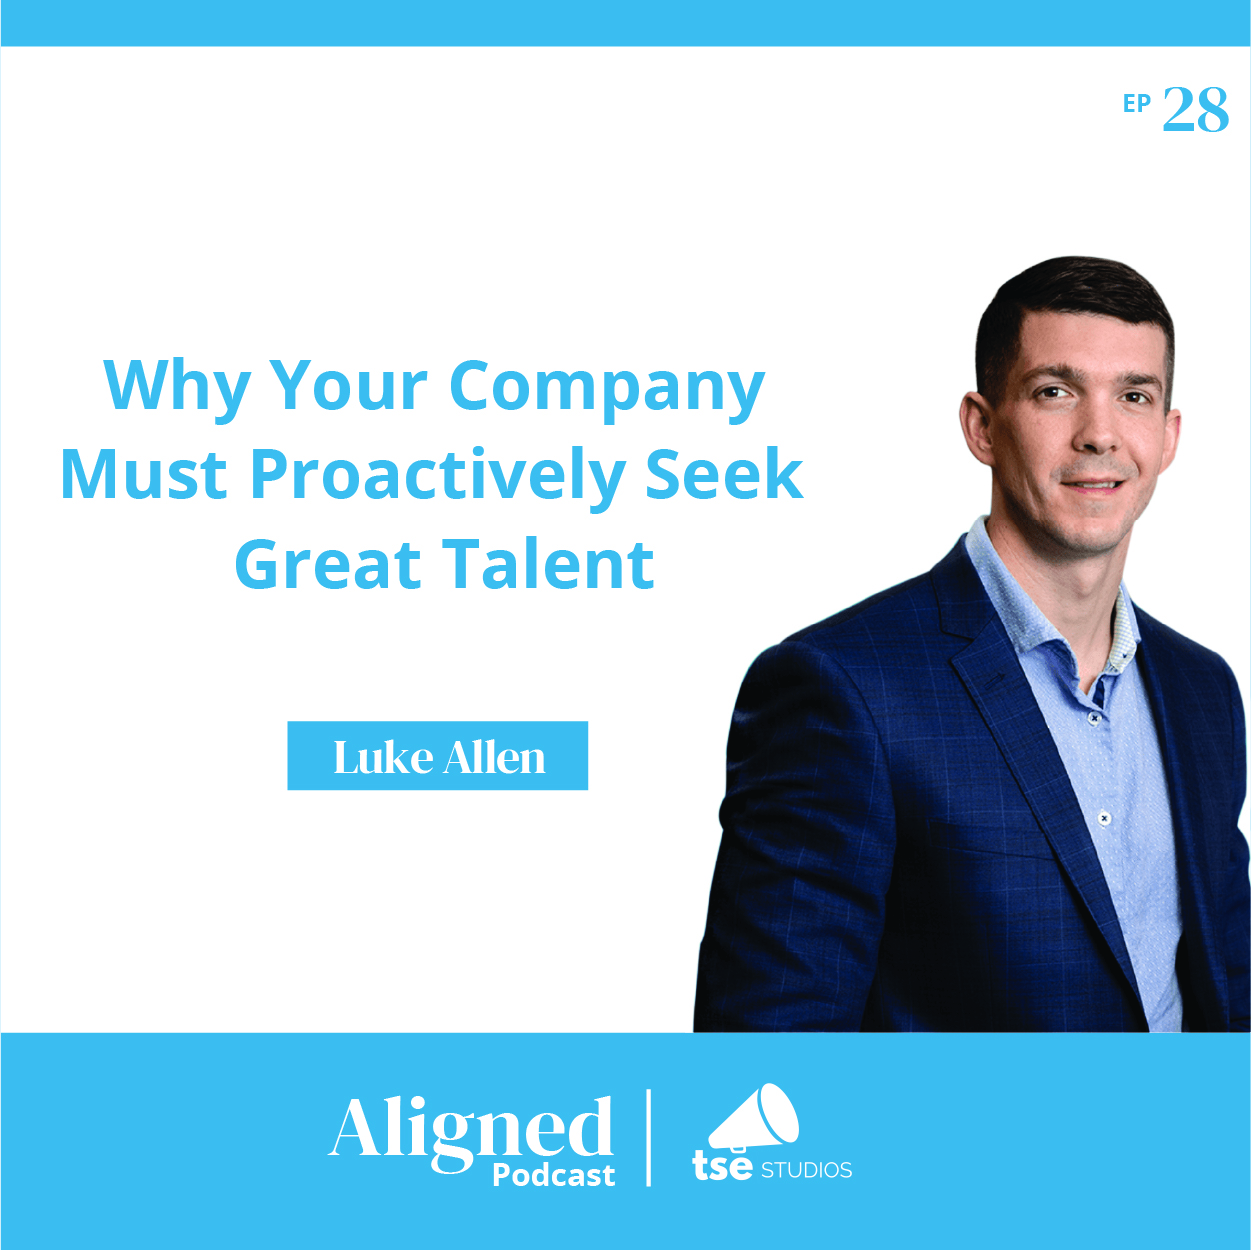 Why Your Company Must Proactively Seek Great Talent